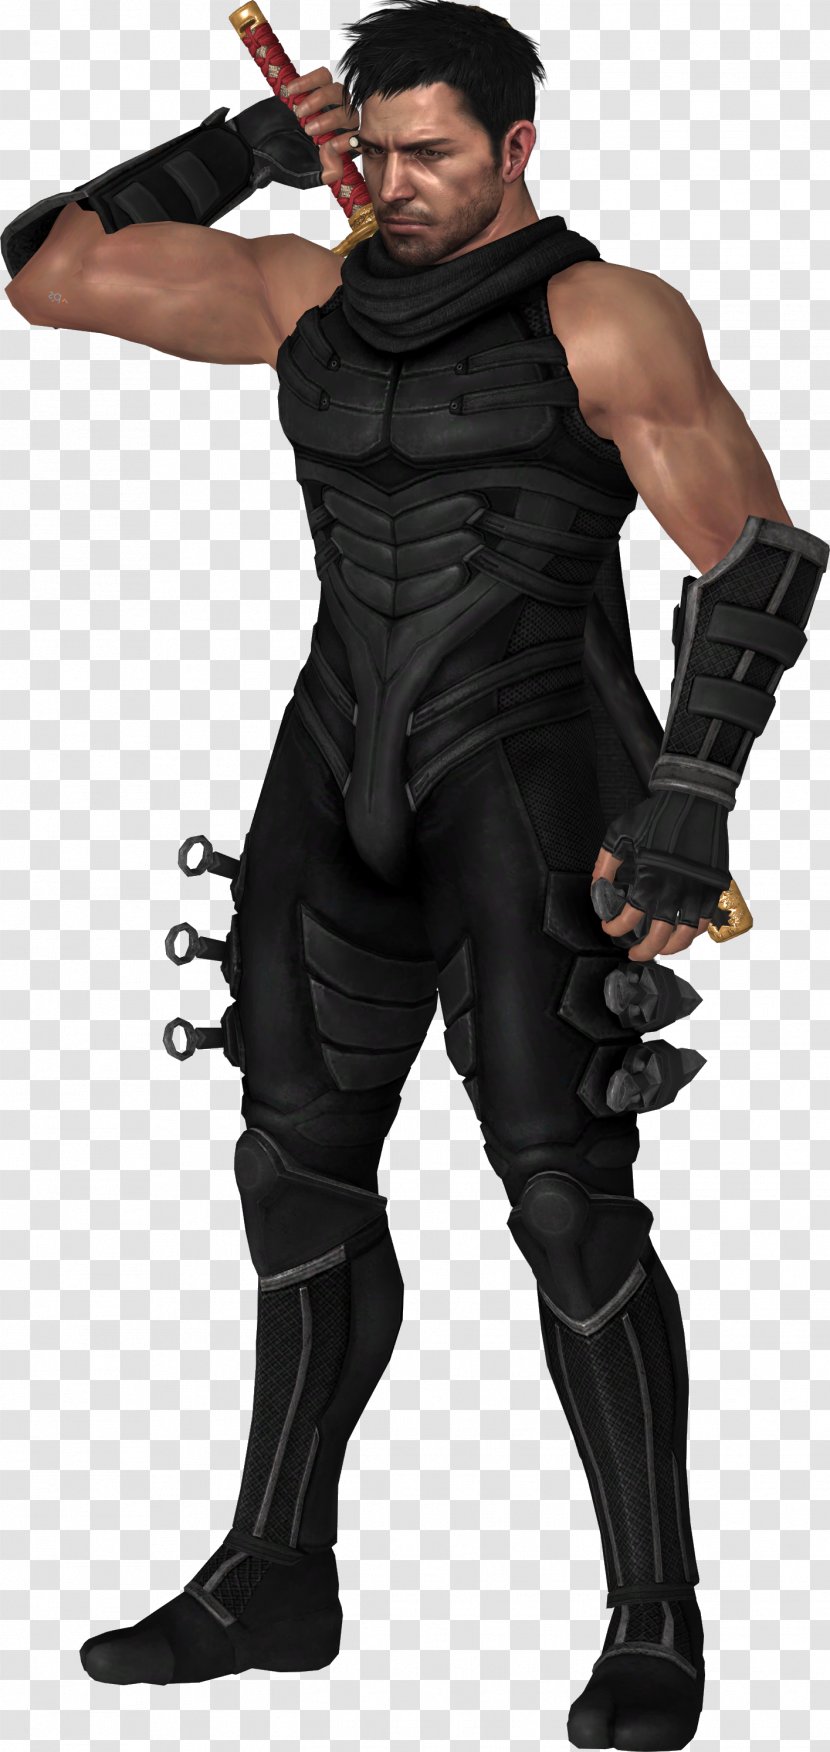 Resident Evil 6 5 Chris Redfield Dead Or Alive Costume - Muscle - Benoit Transparent PNG